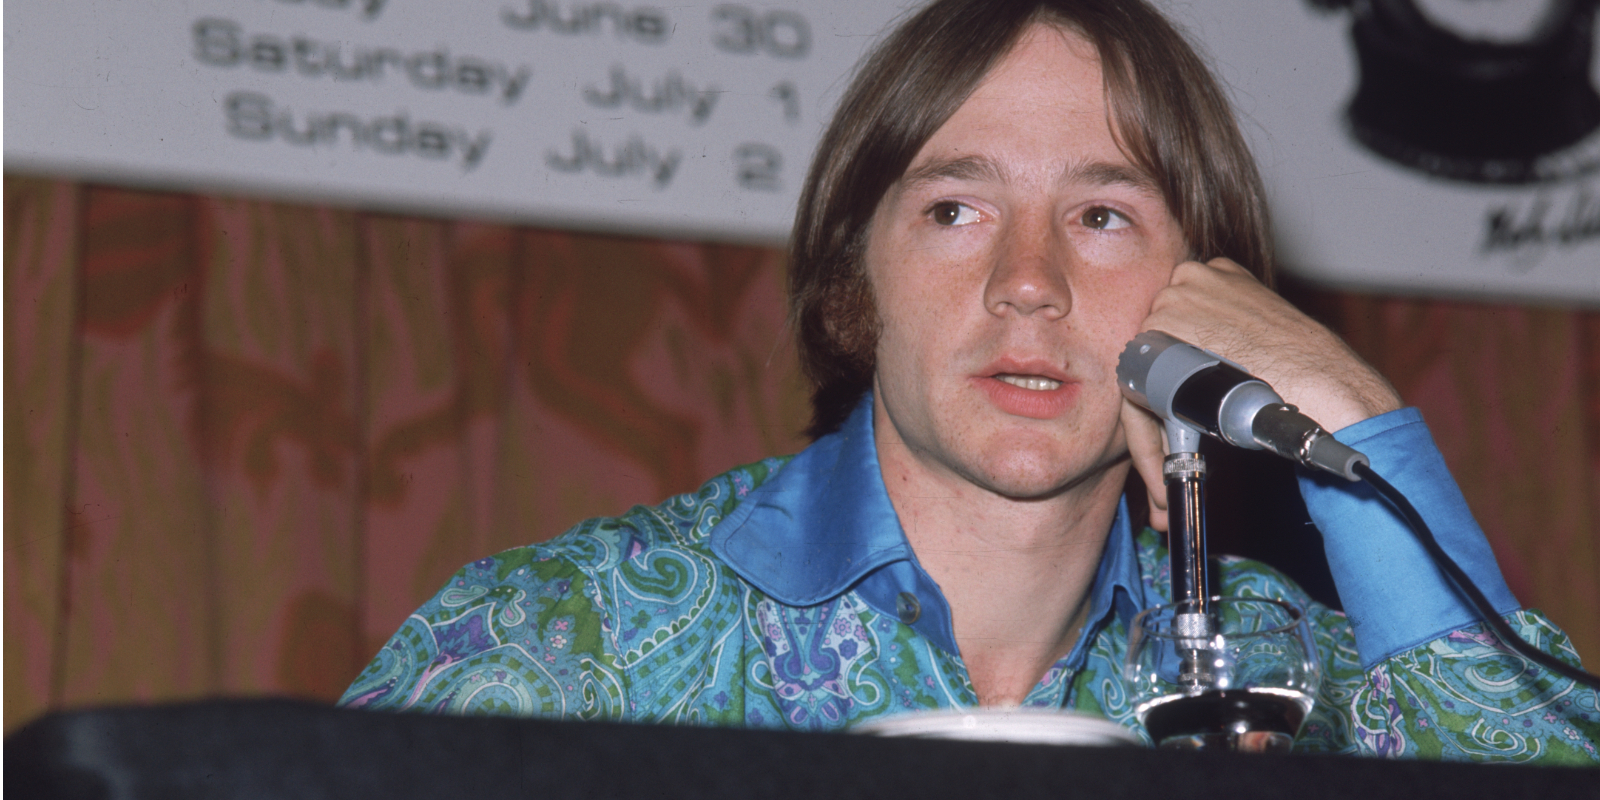 Peter Tork, a singer and bass guitarist with the manufactured pop group the Monkees, at a press conference in England.